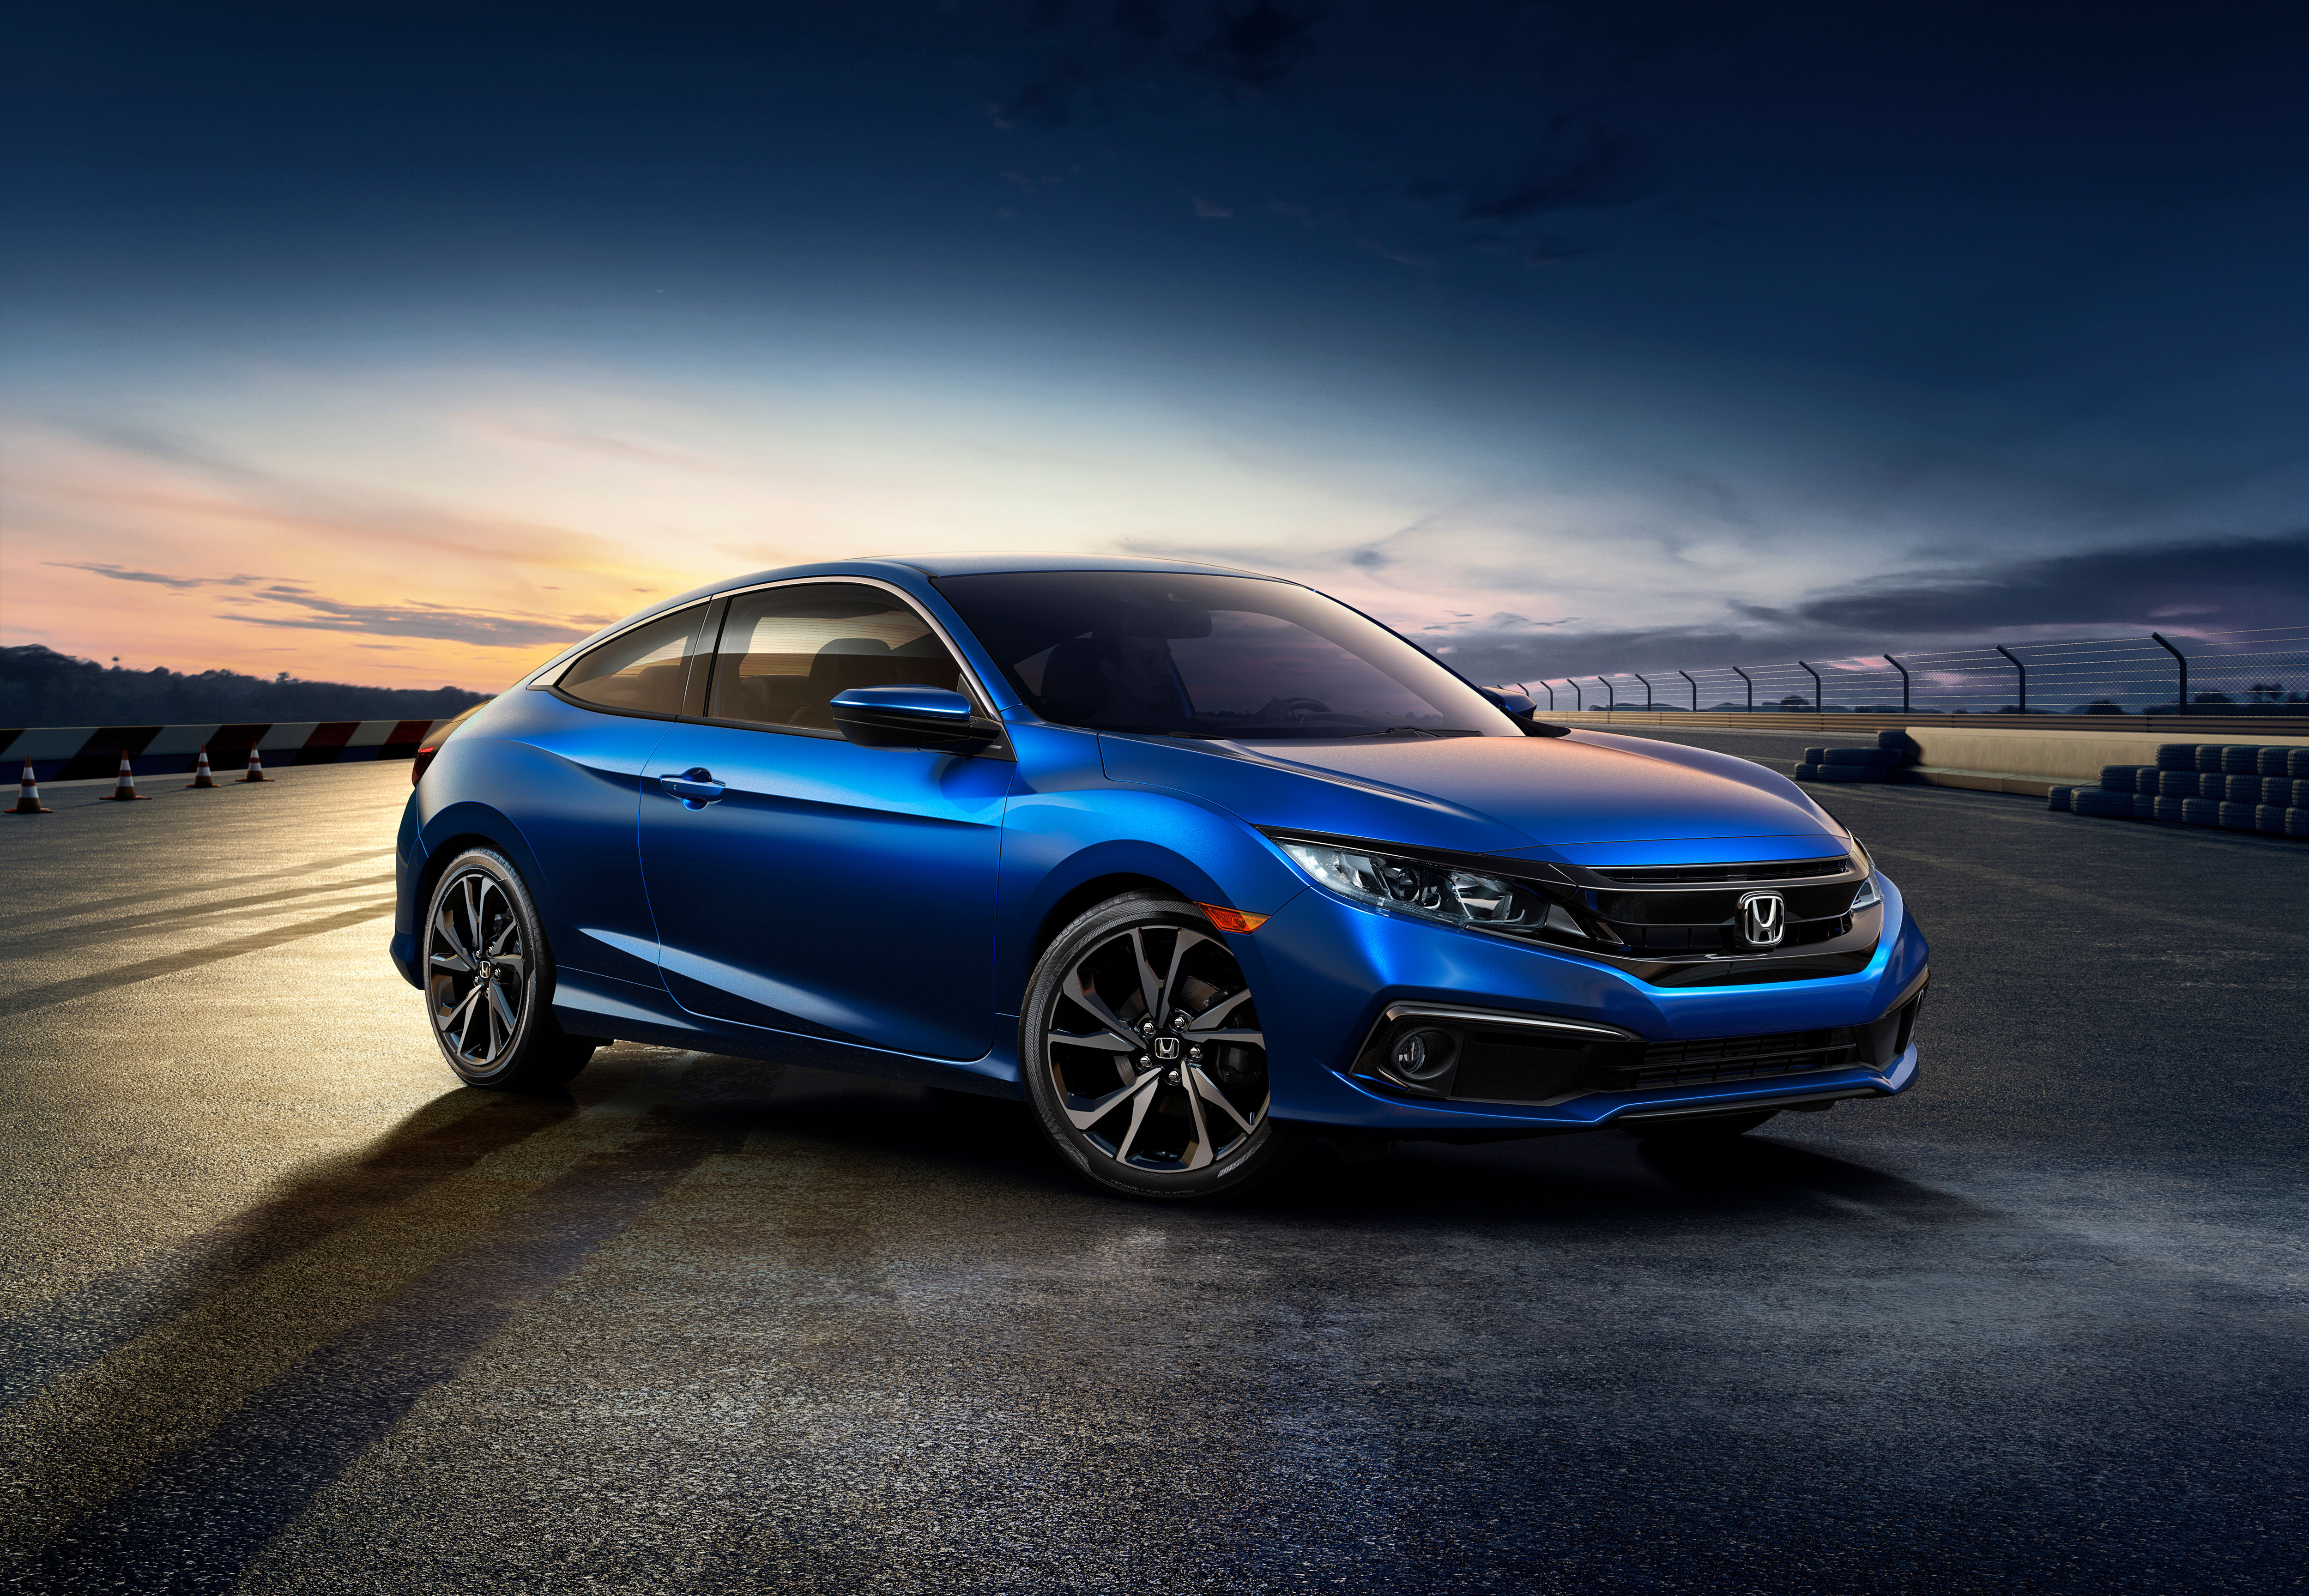 Honda Introduces Redesigned 2019 Civic Coupe and Sedan